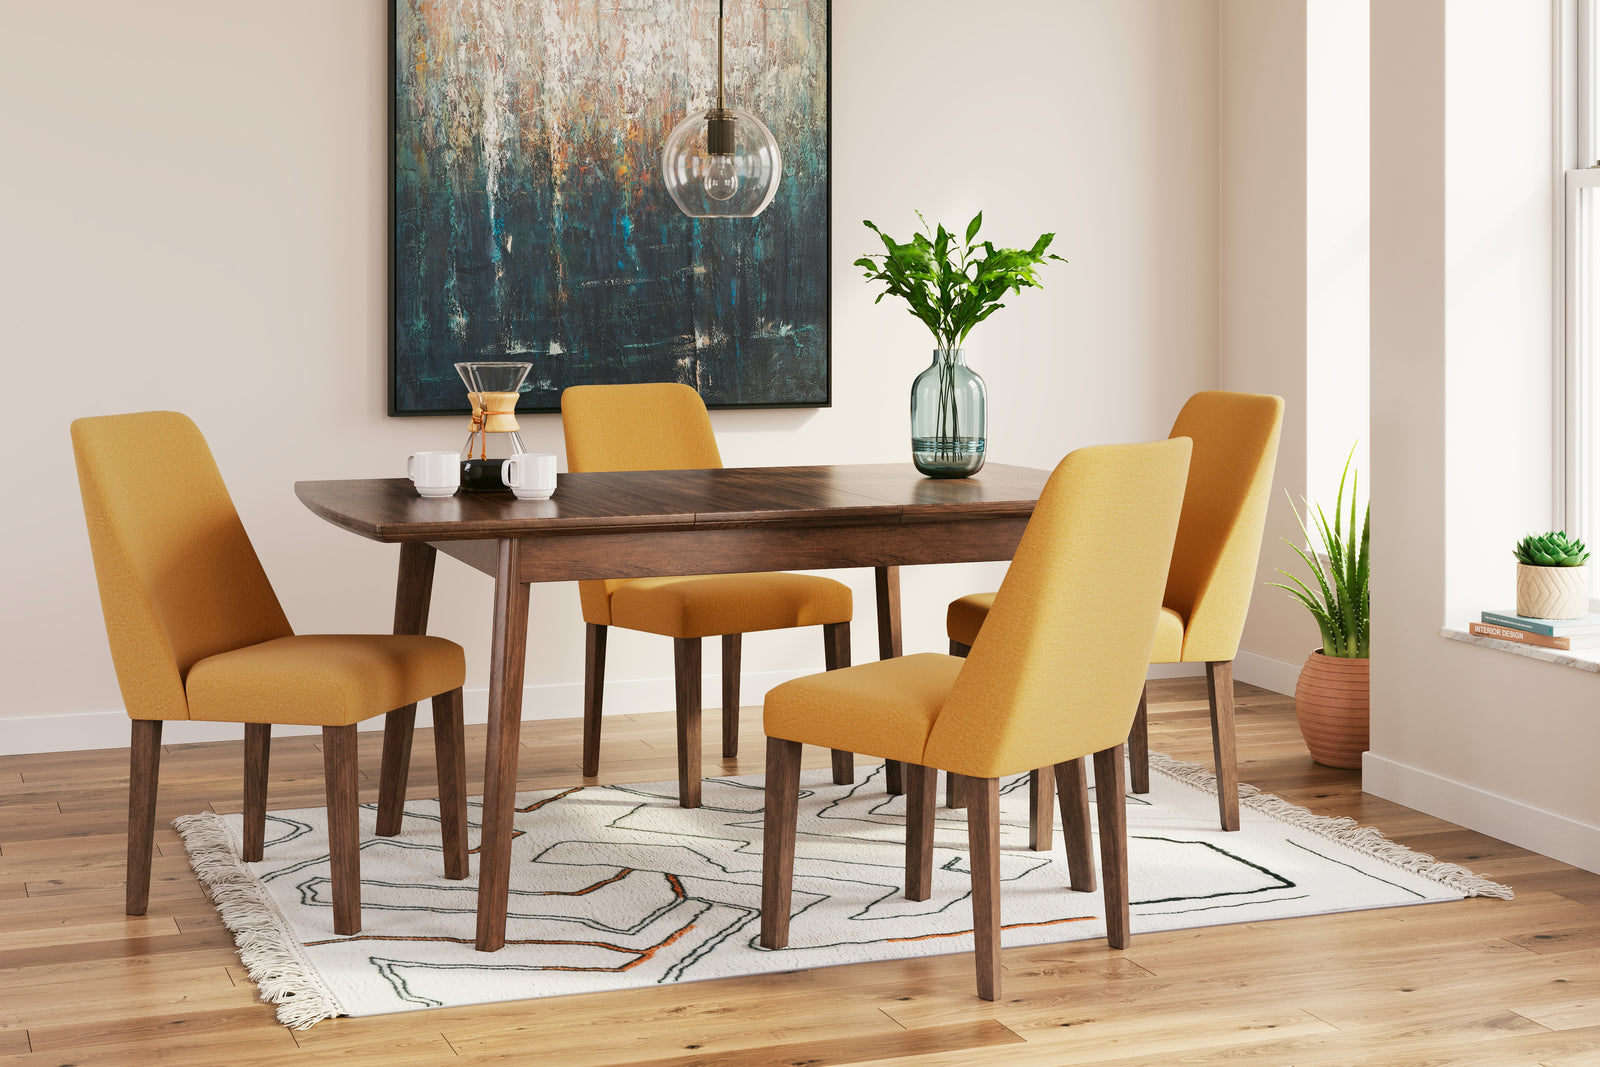 Lyncott Mustard/brown Dining Table And 4 Chairs